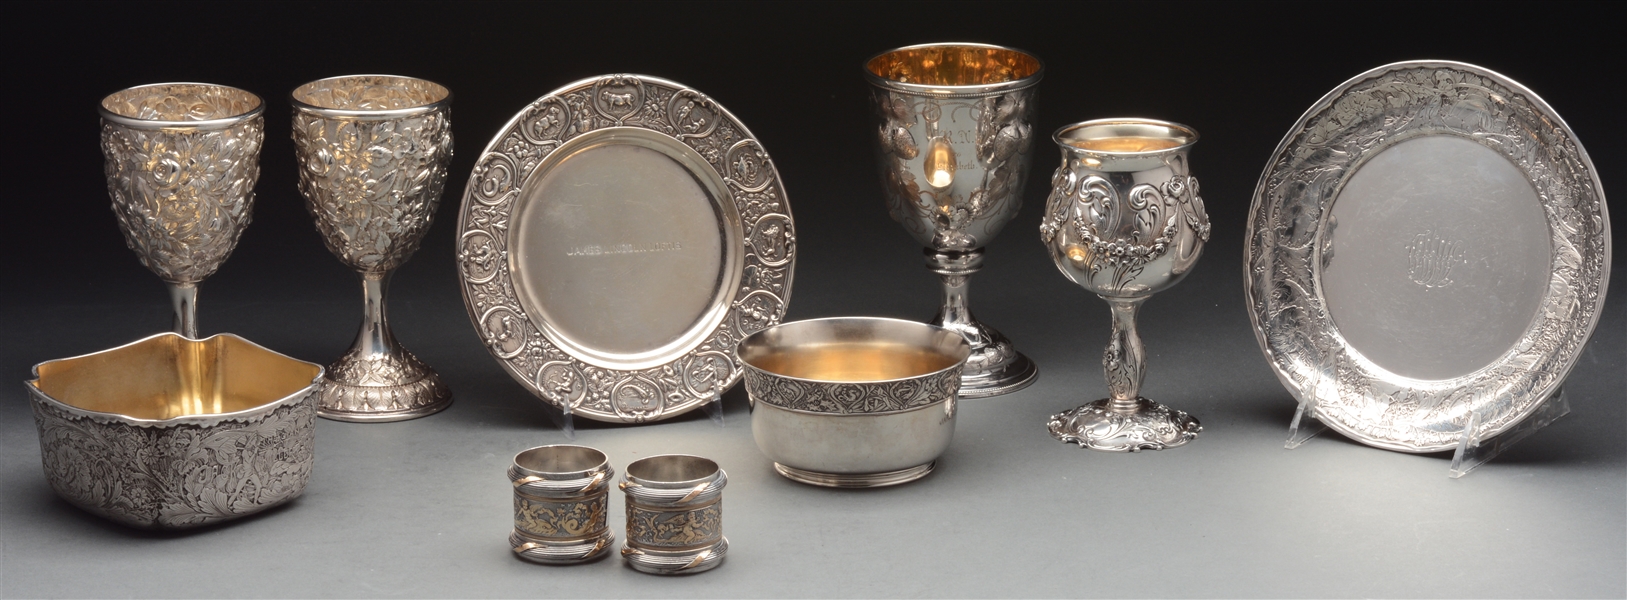 10 ASSORTED STERLING SILVER GOBLETS, PLATES, BOWLS AND NAPKIN RINGS.